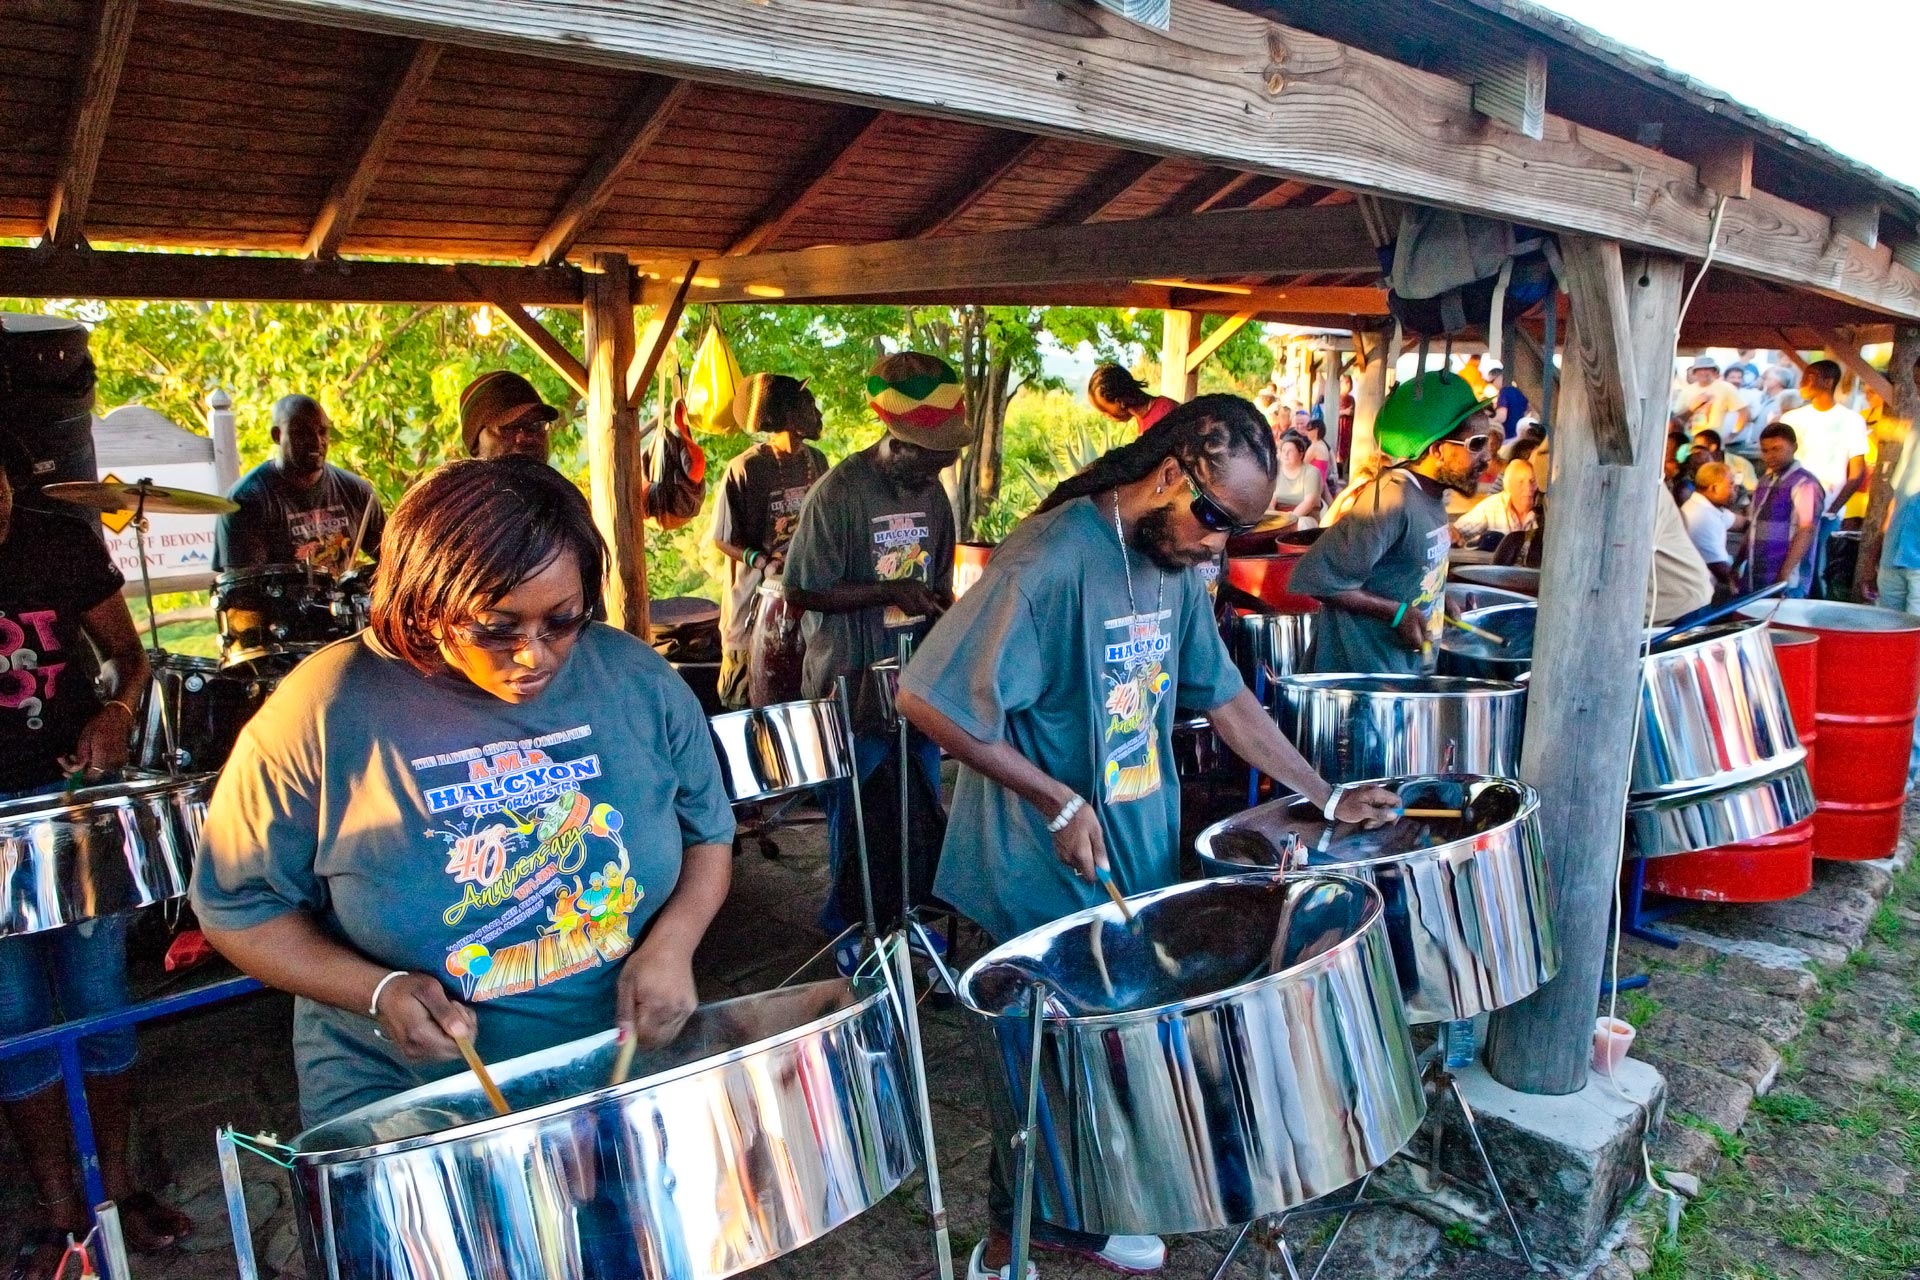 A group playing steel drums